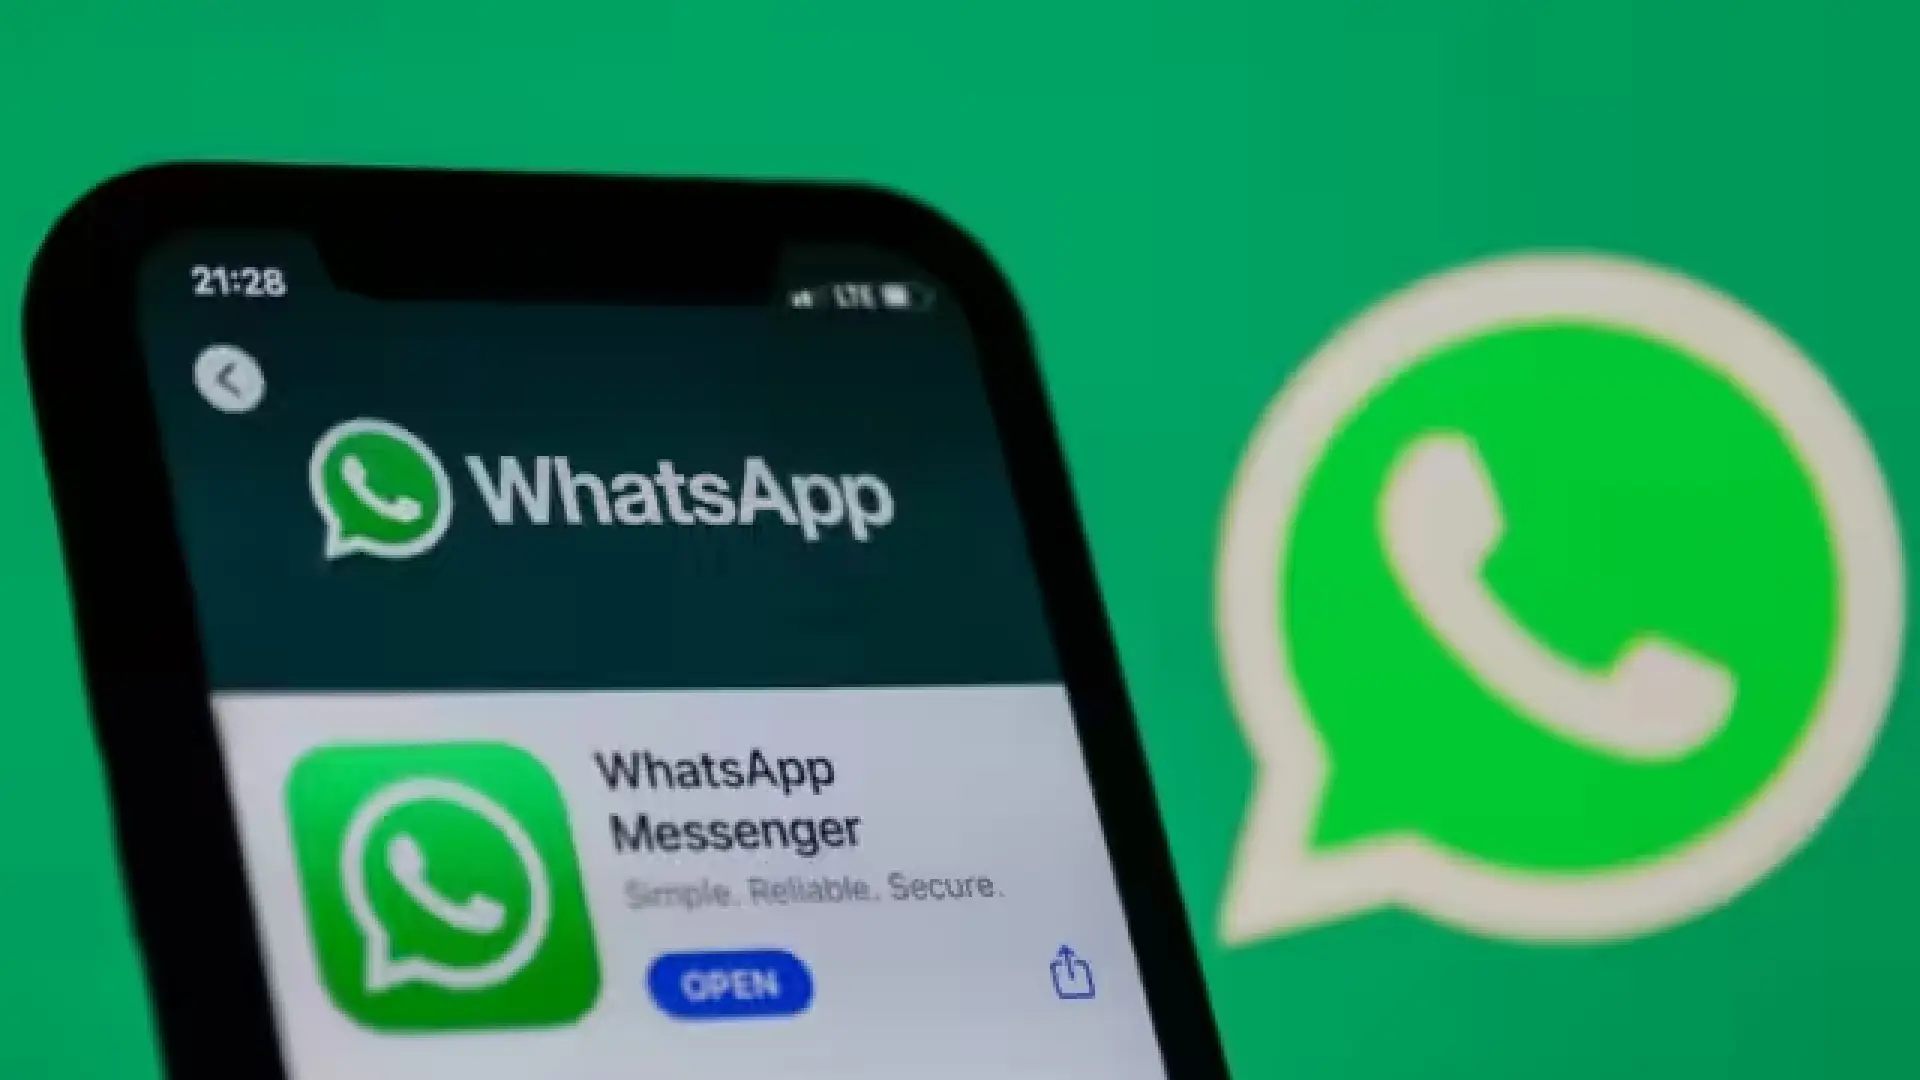 What Can Users Expect from the Upcoming WhatsApp Features